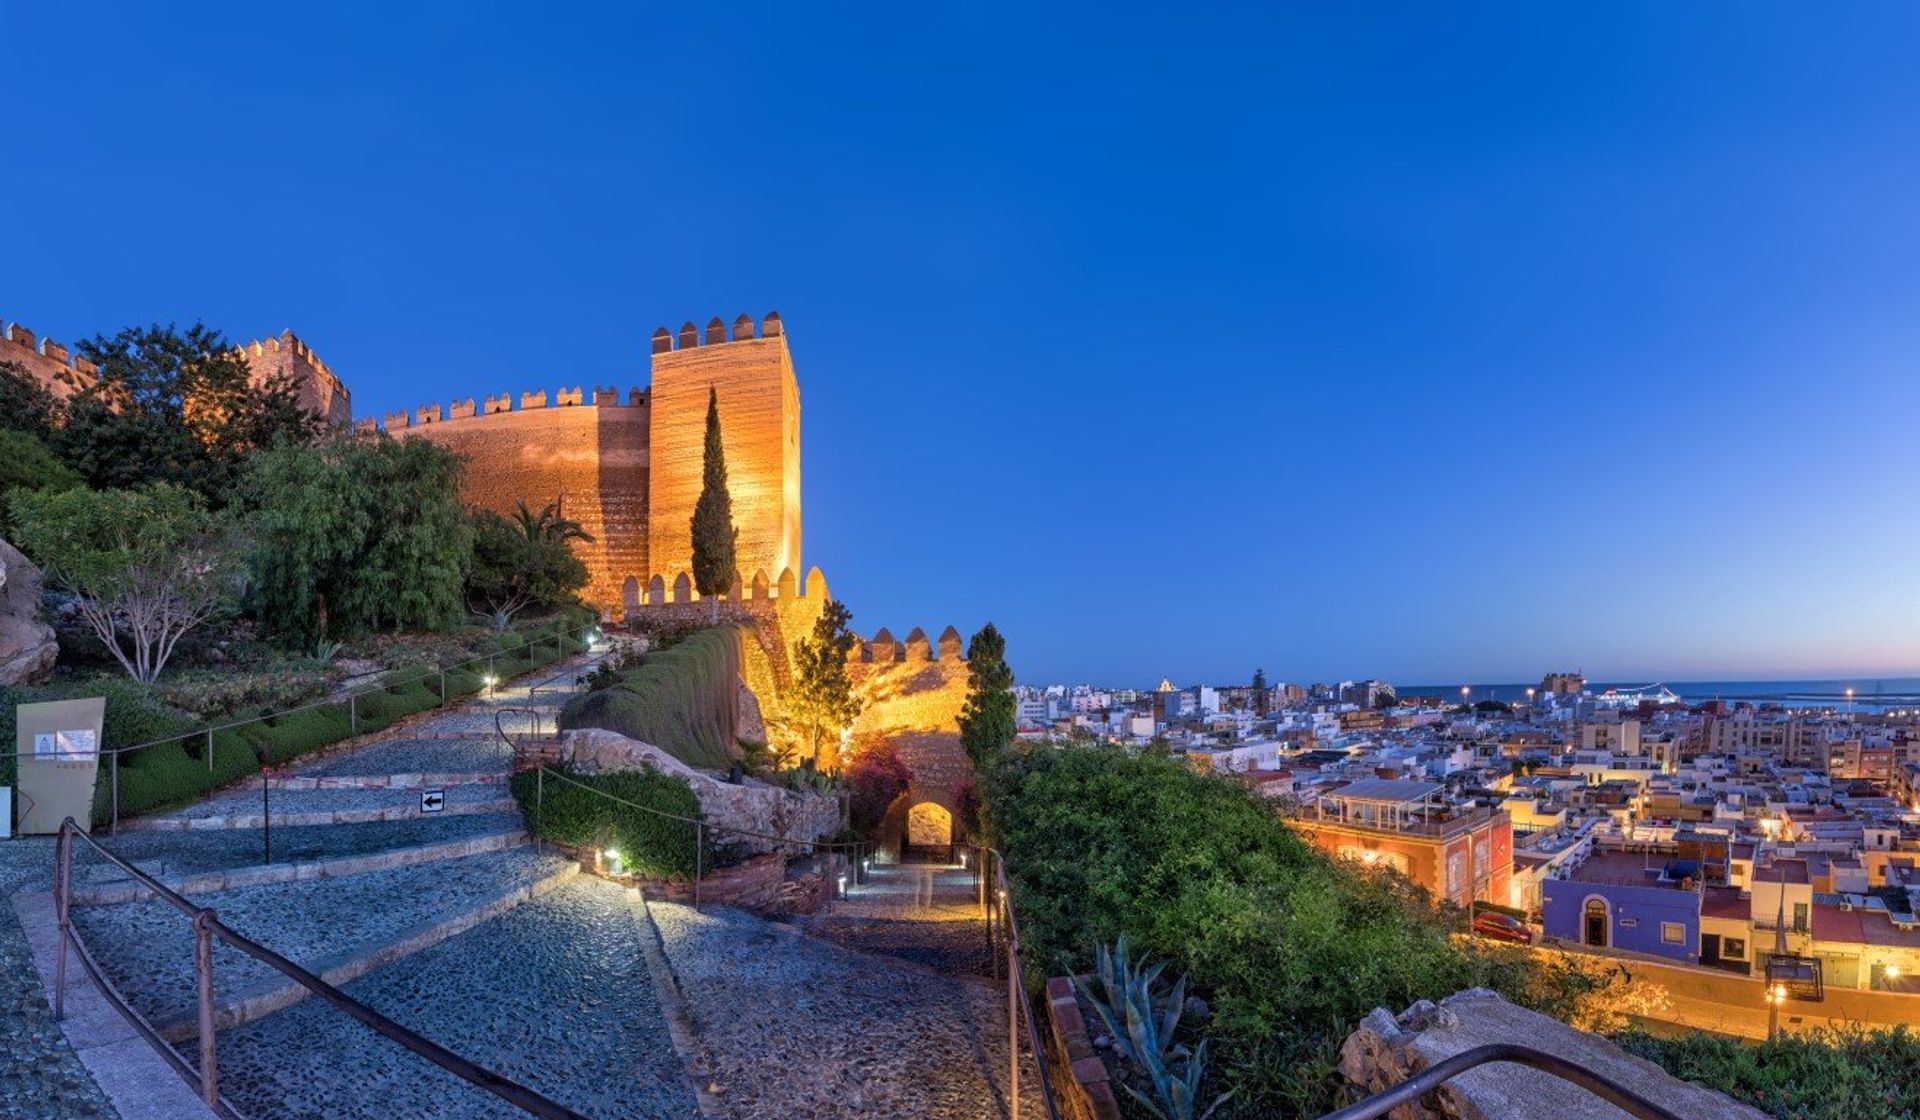 Don't miss out on the art museum and panoramic views of the Mediterranean from 16th century Santa Ana Castle in Roquetas